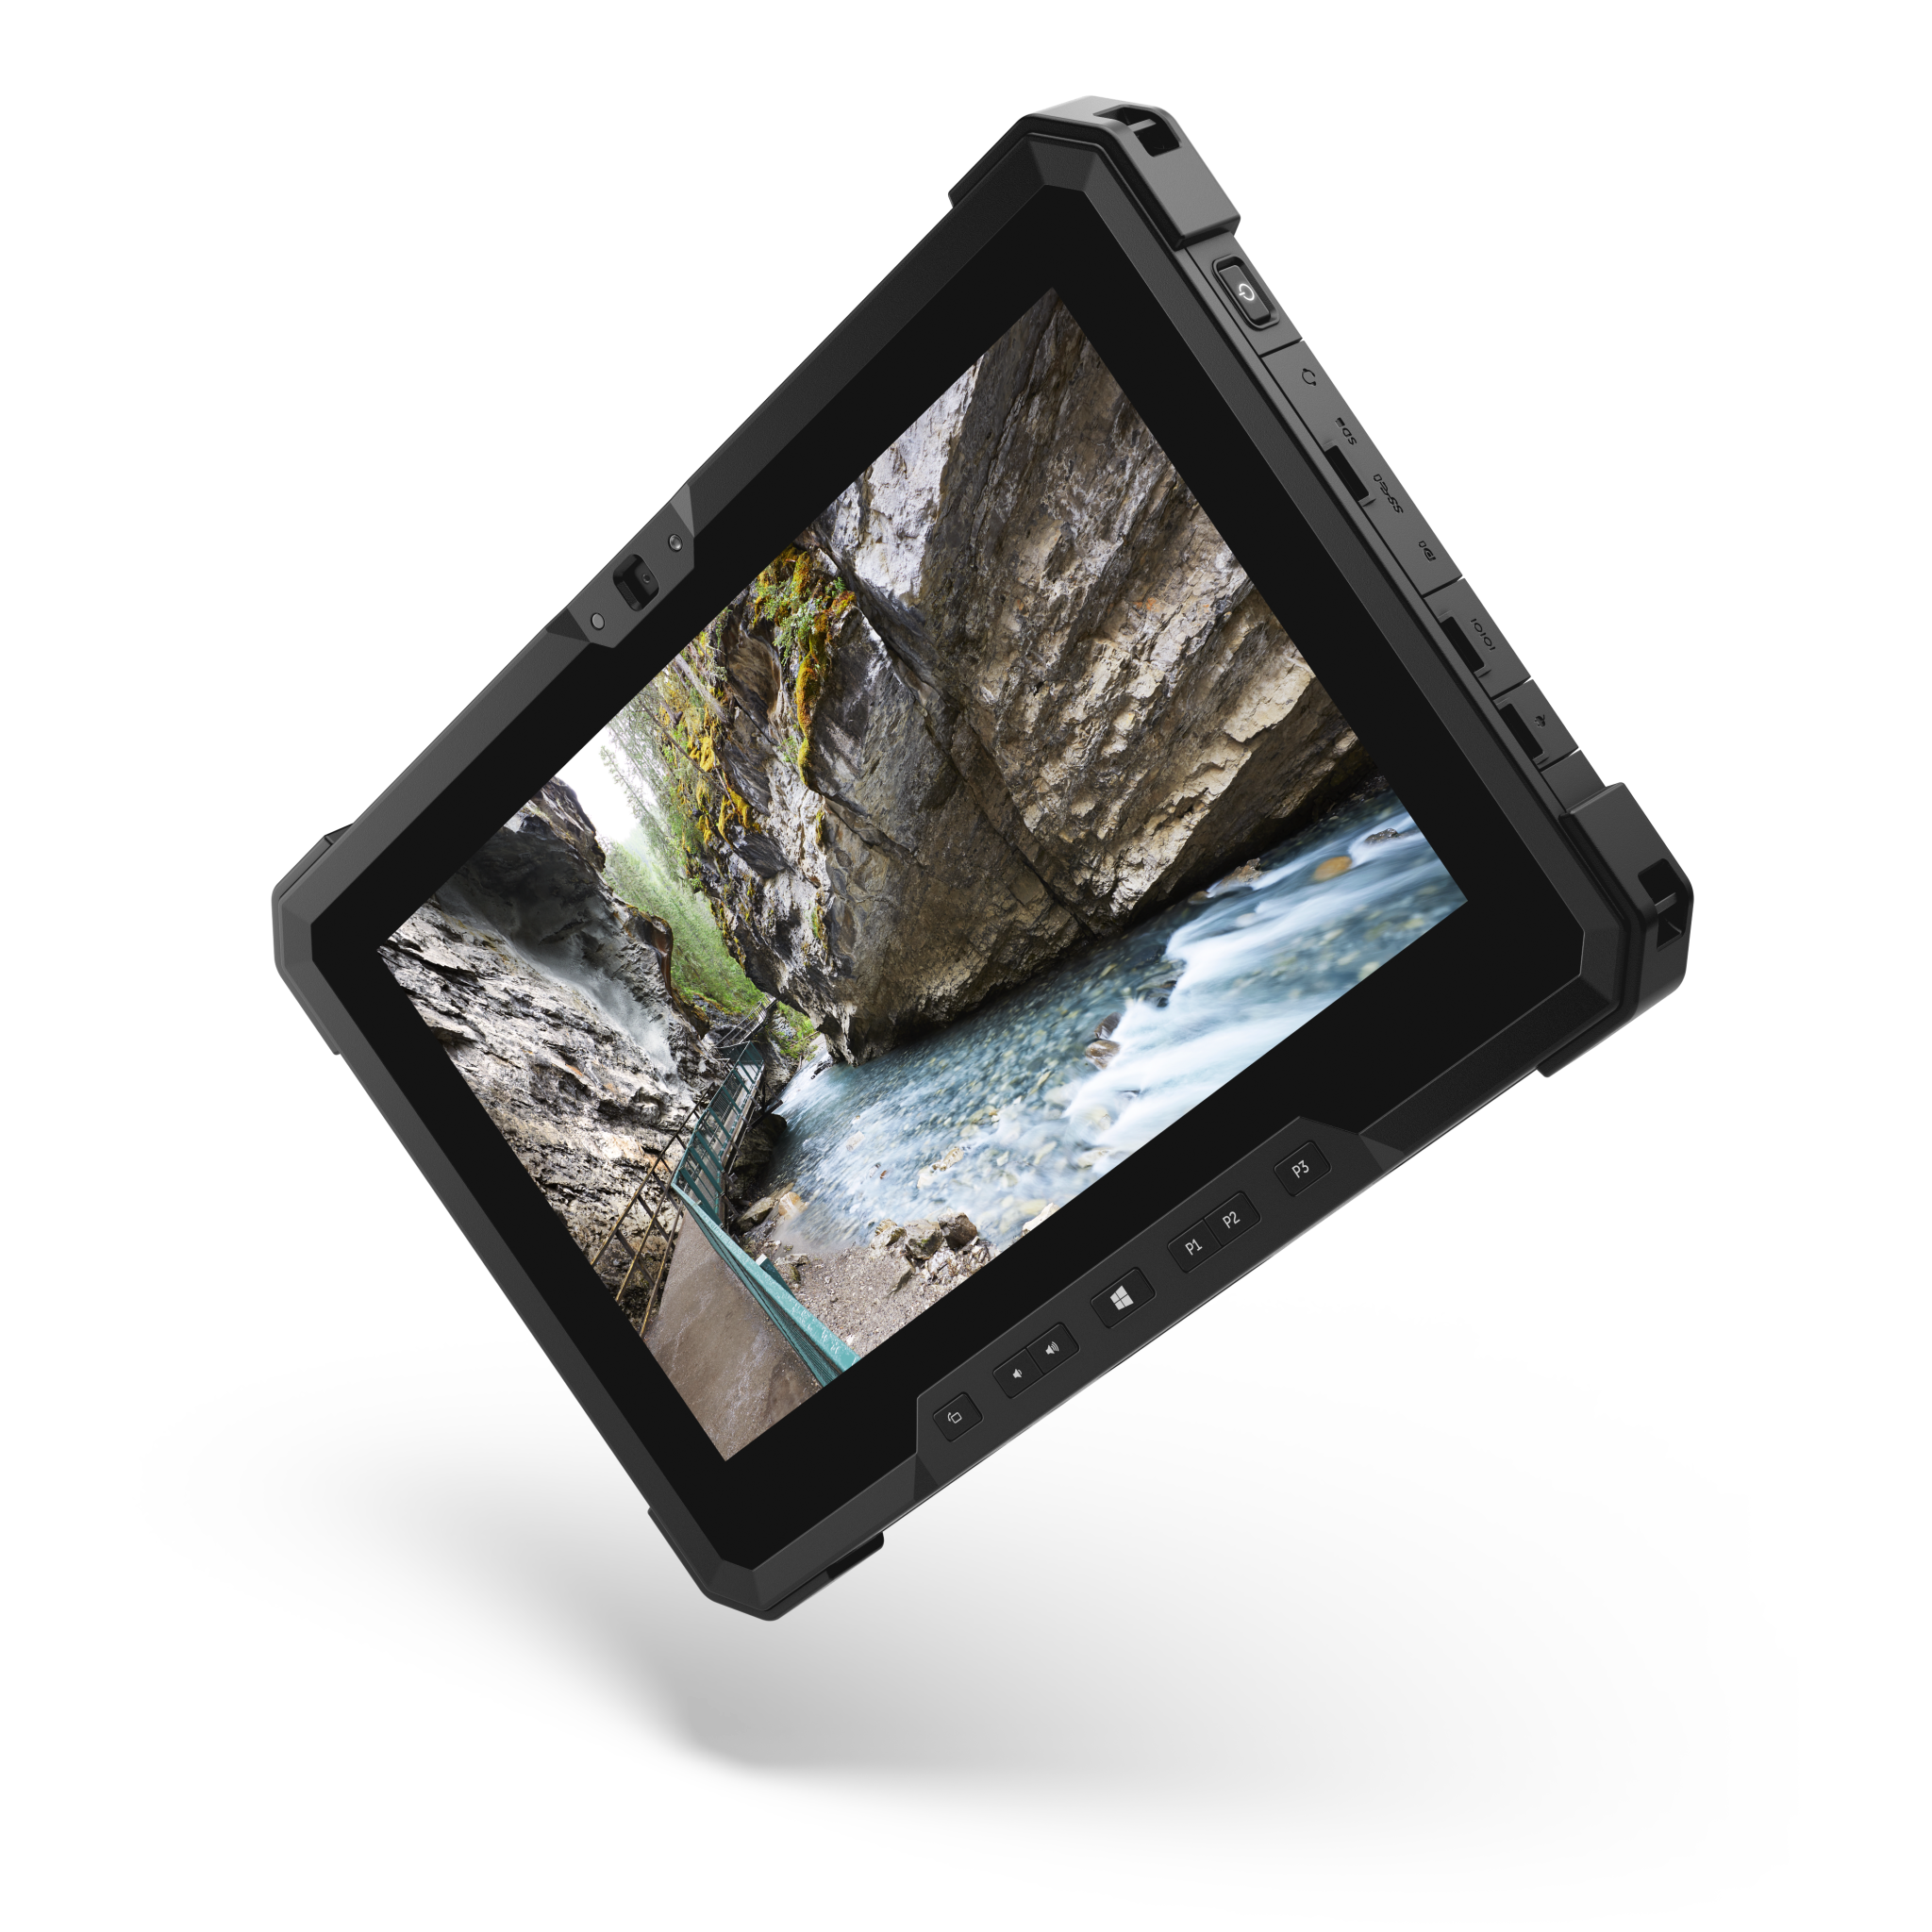 Dell Rolls Out The Latitude 7212 Rugged Extreme Tablet Notebookcheck Net News